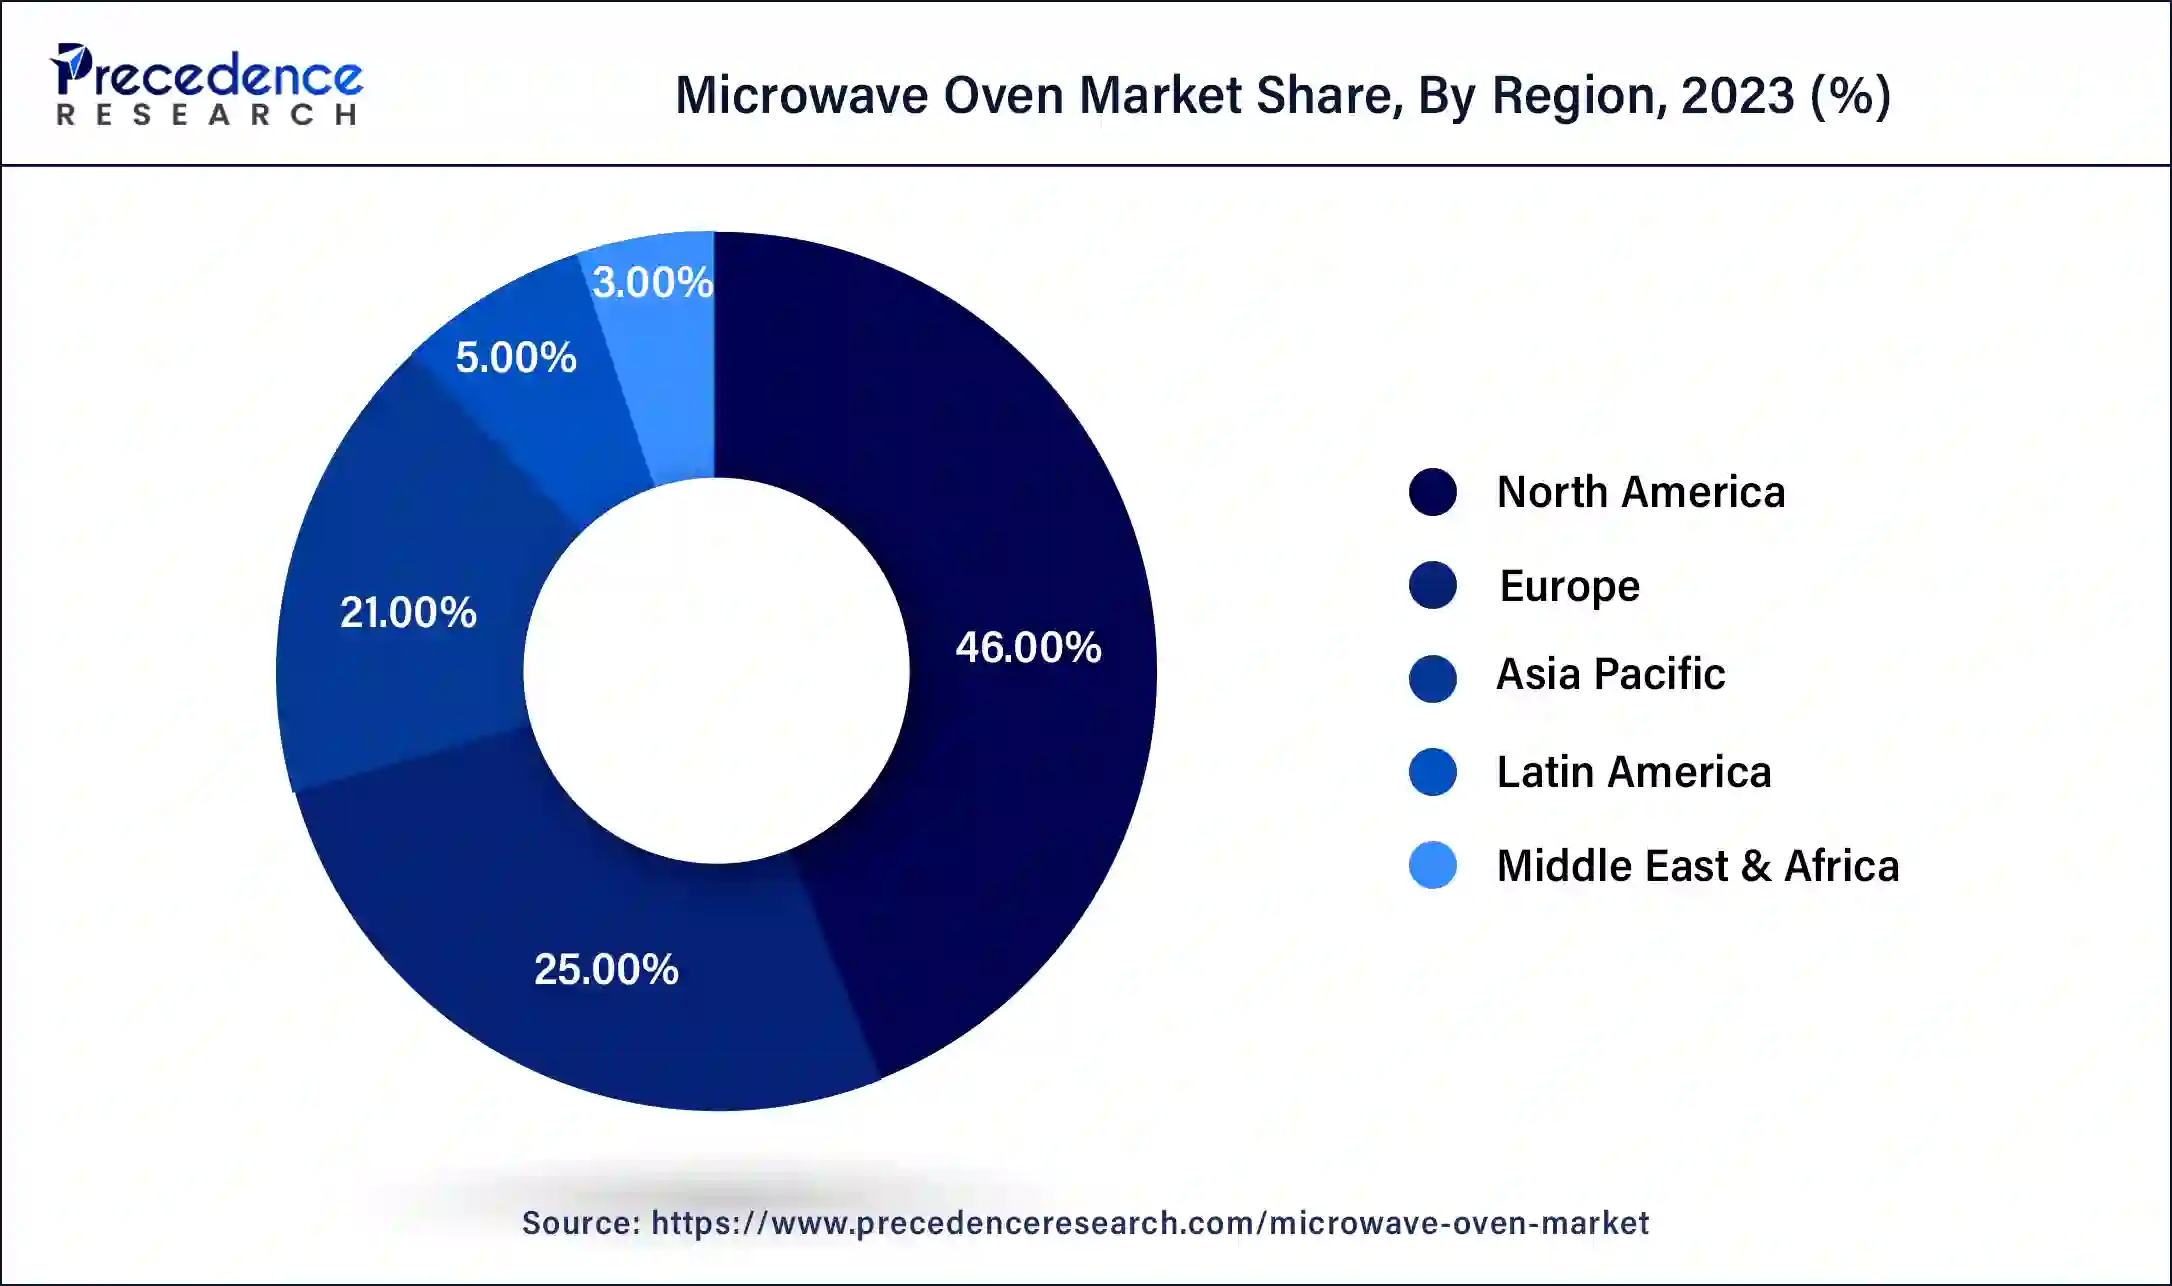 Microwave Oven Market Share, By Region, 2023 (%)